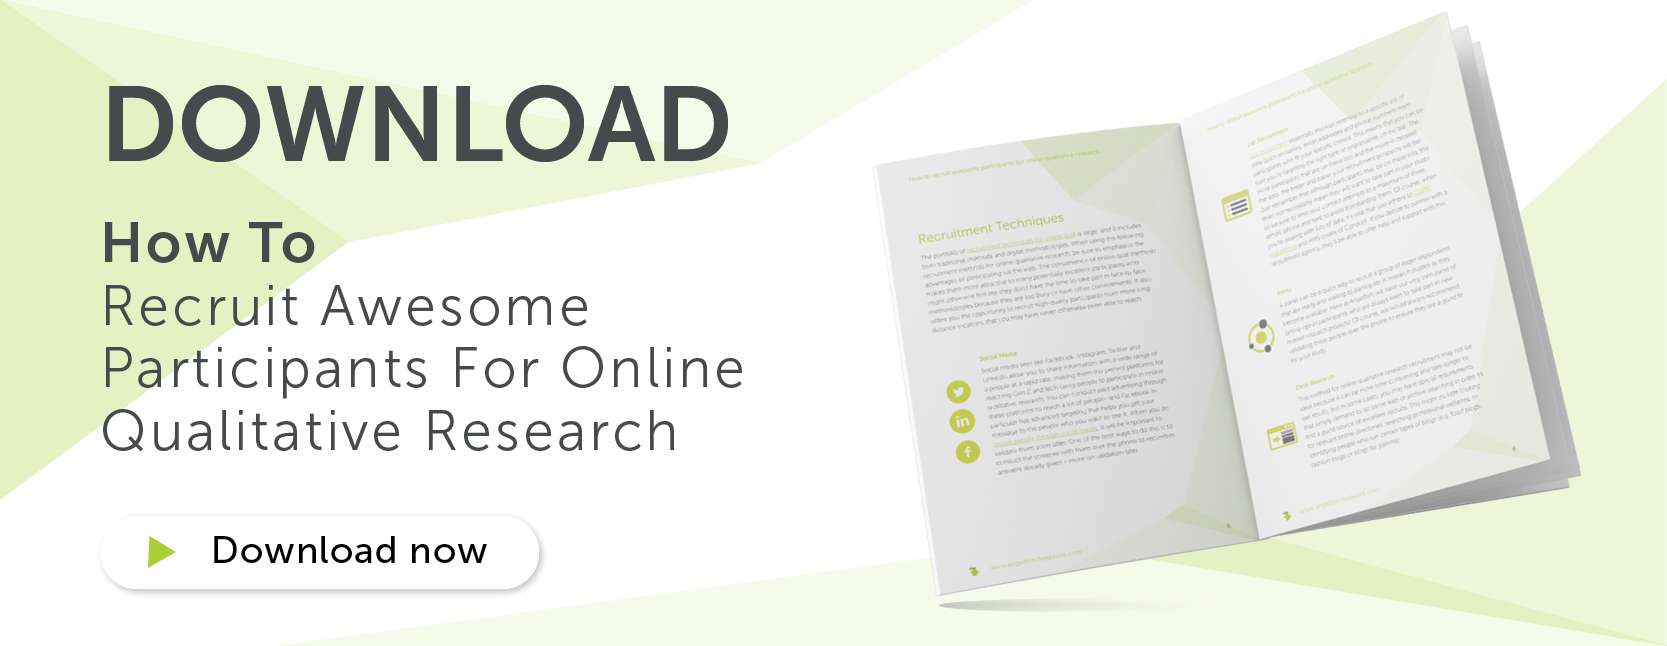 Download CTA - How to recruit awesome participants for online qualitative research